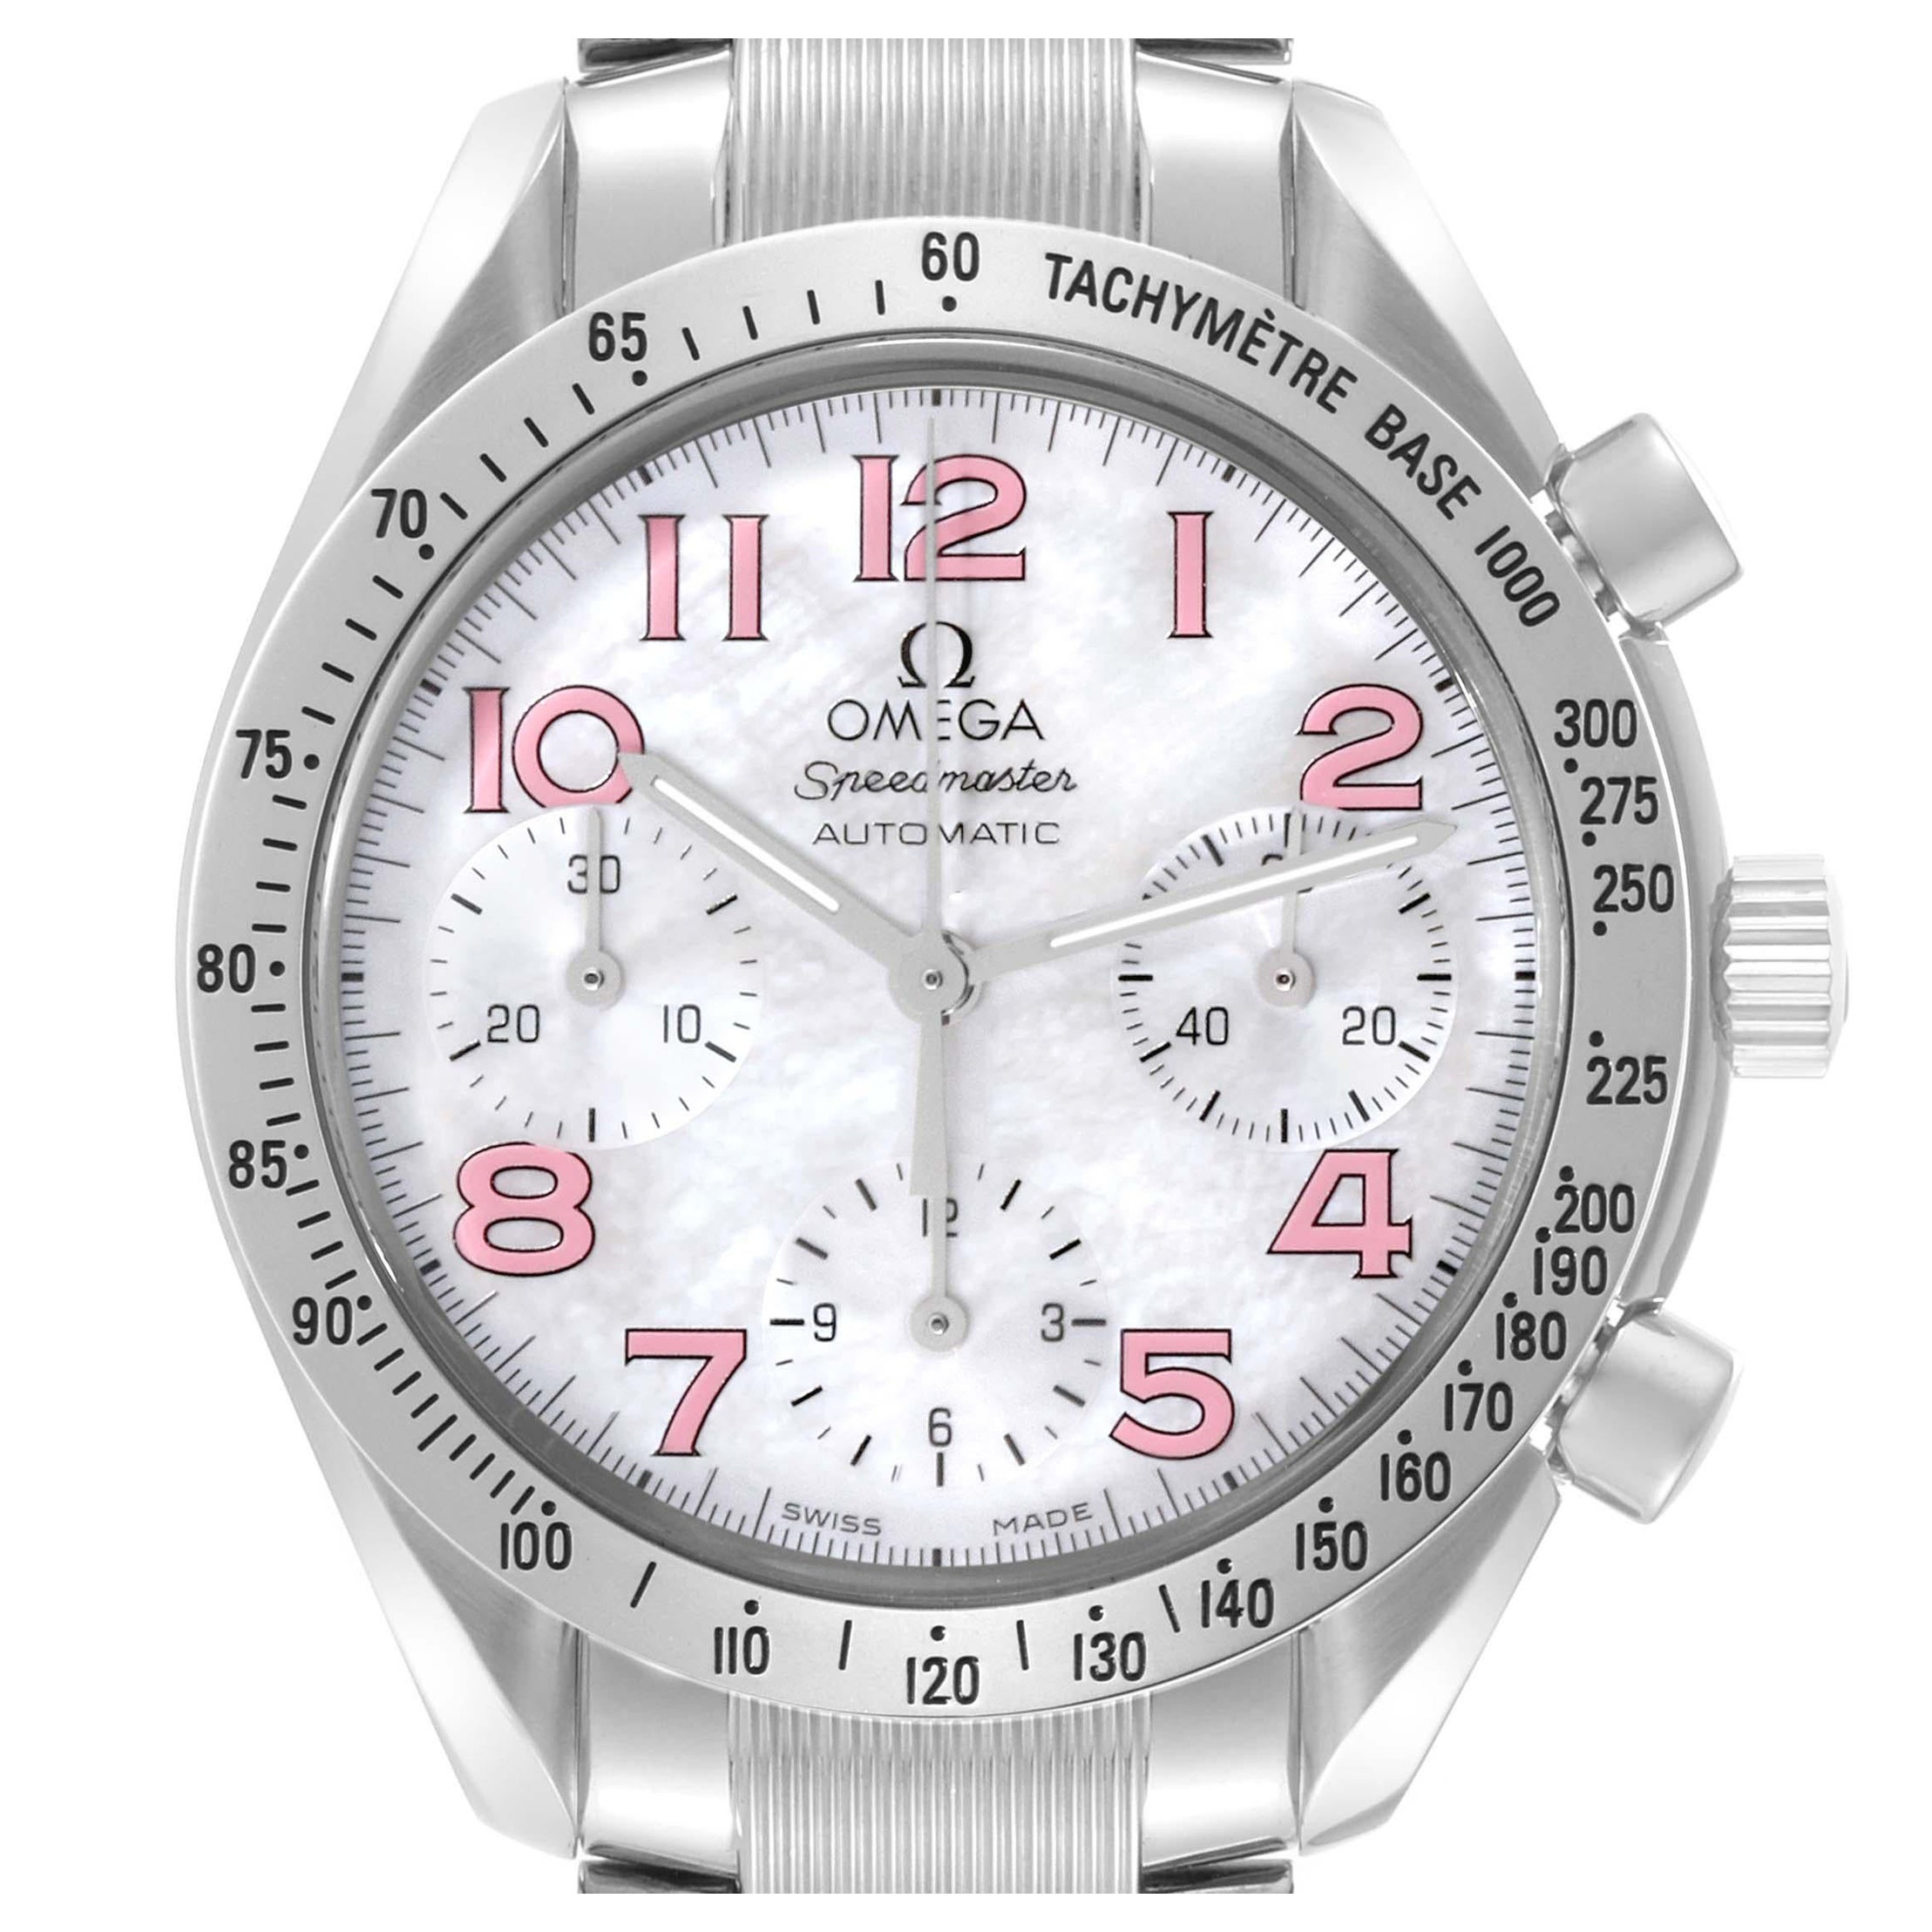 Omega Speedmaster Mother of Pearl Dial Steel Mens Watch 3534.74.00 Box Card